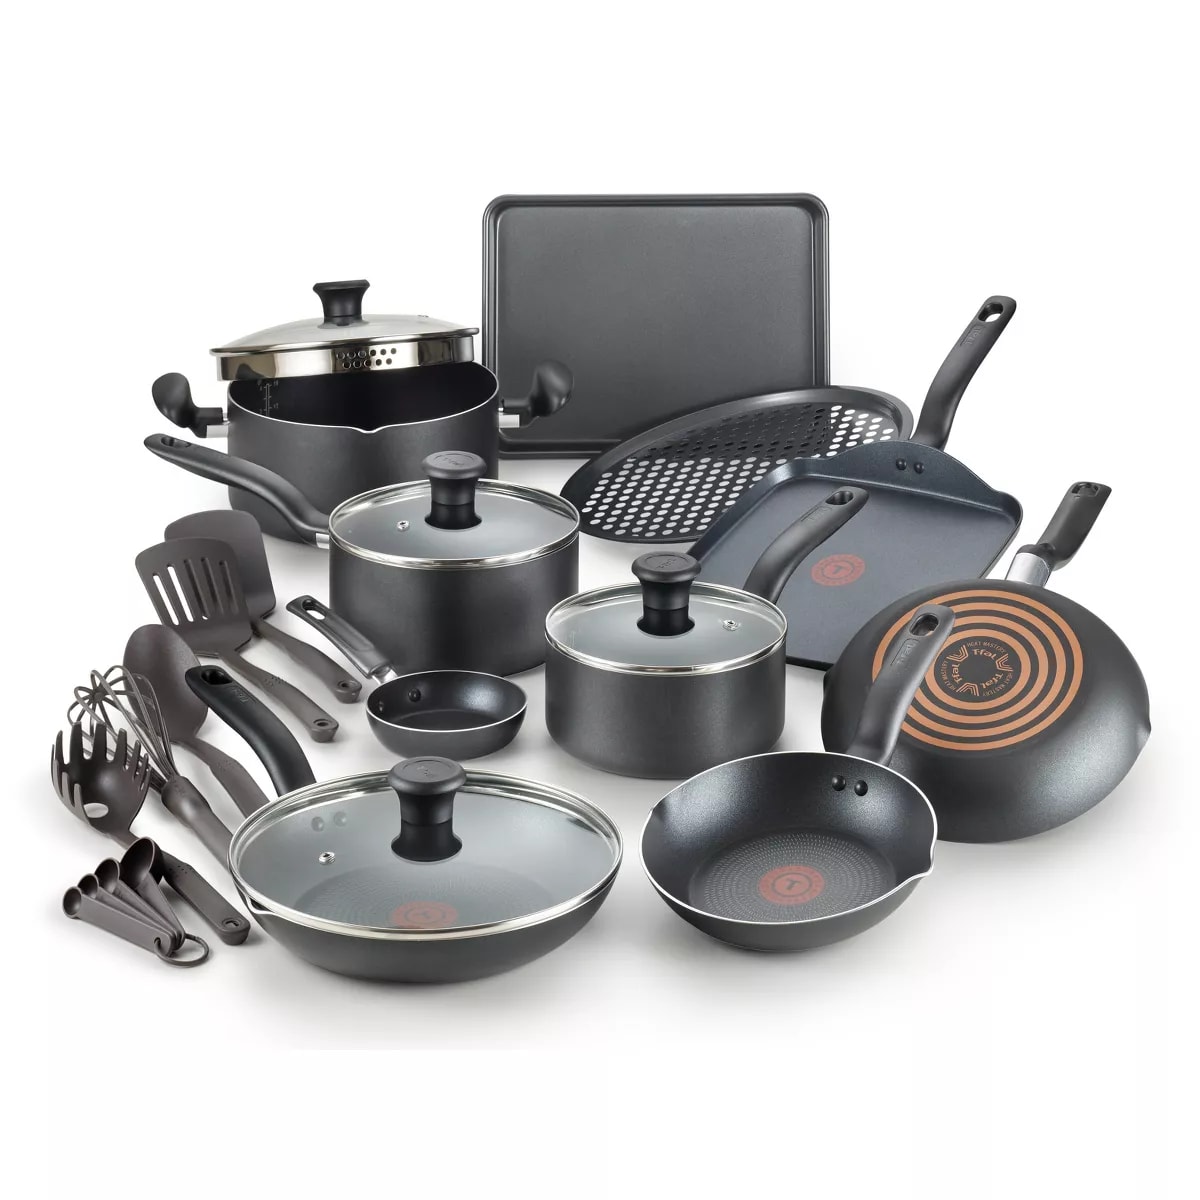 A cookware set of various cooking thingys.